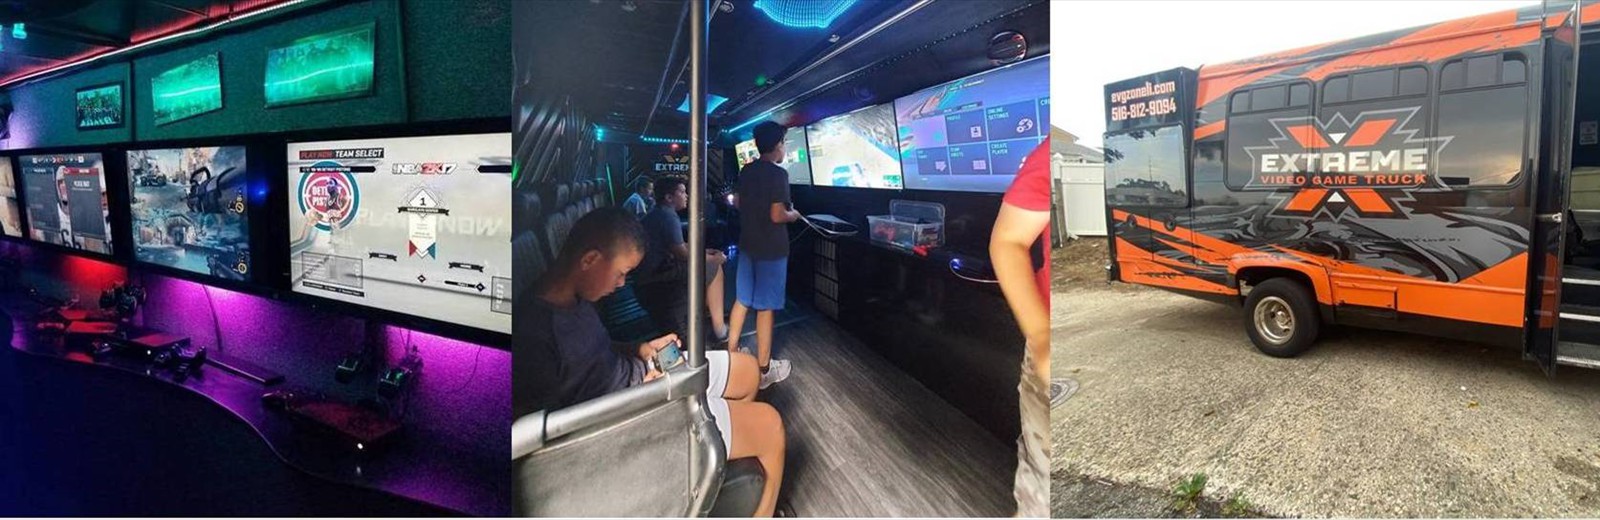 Compact luxury game bus goes where bigger trailers can't!